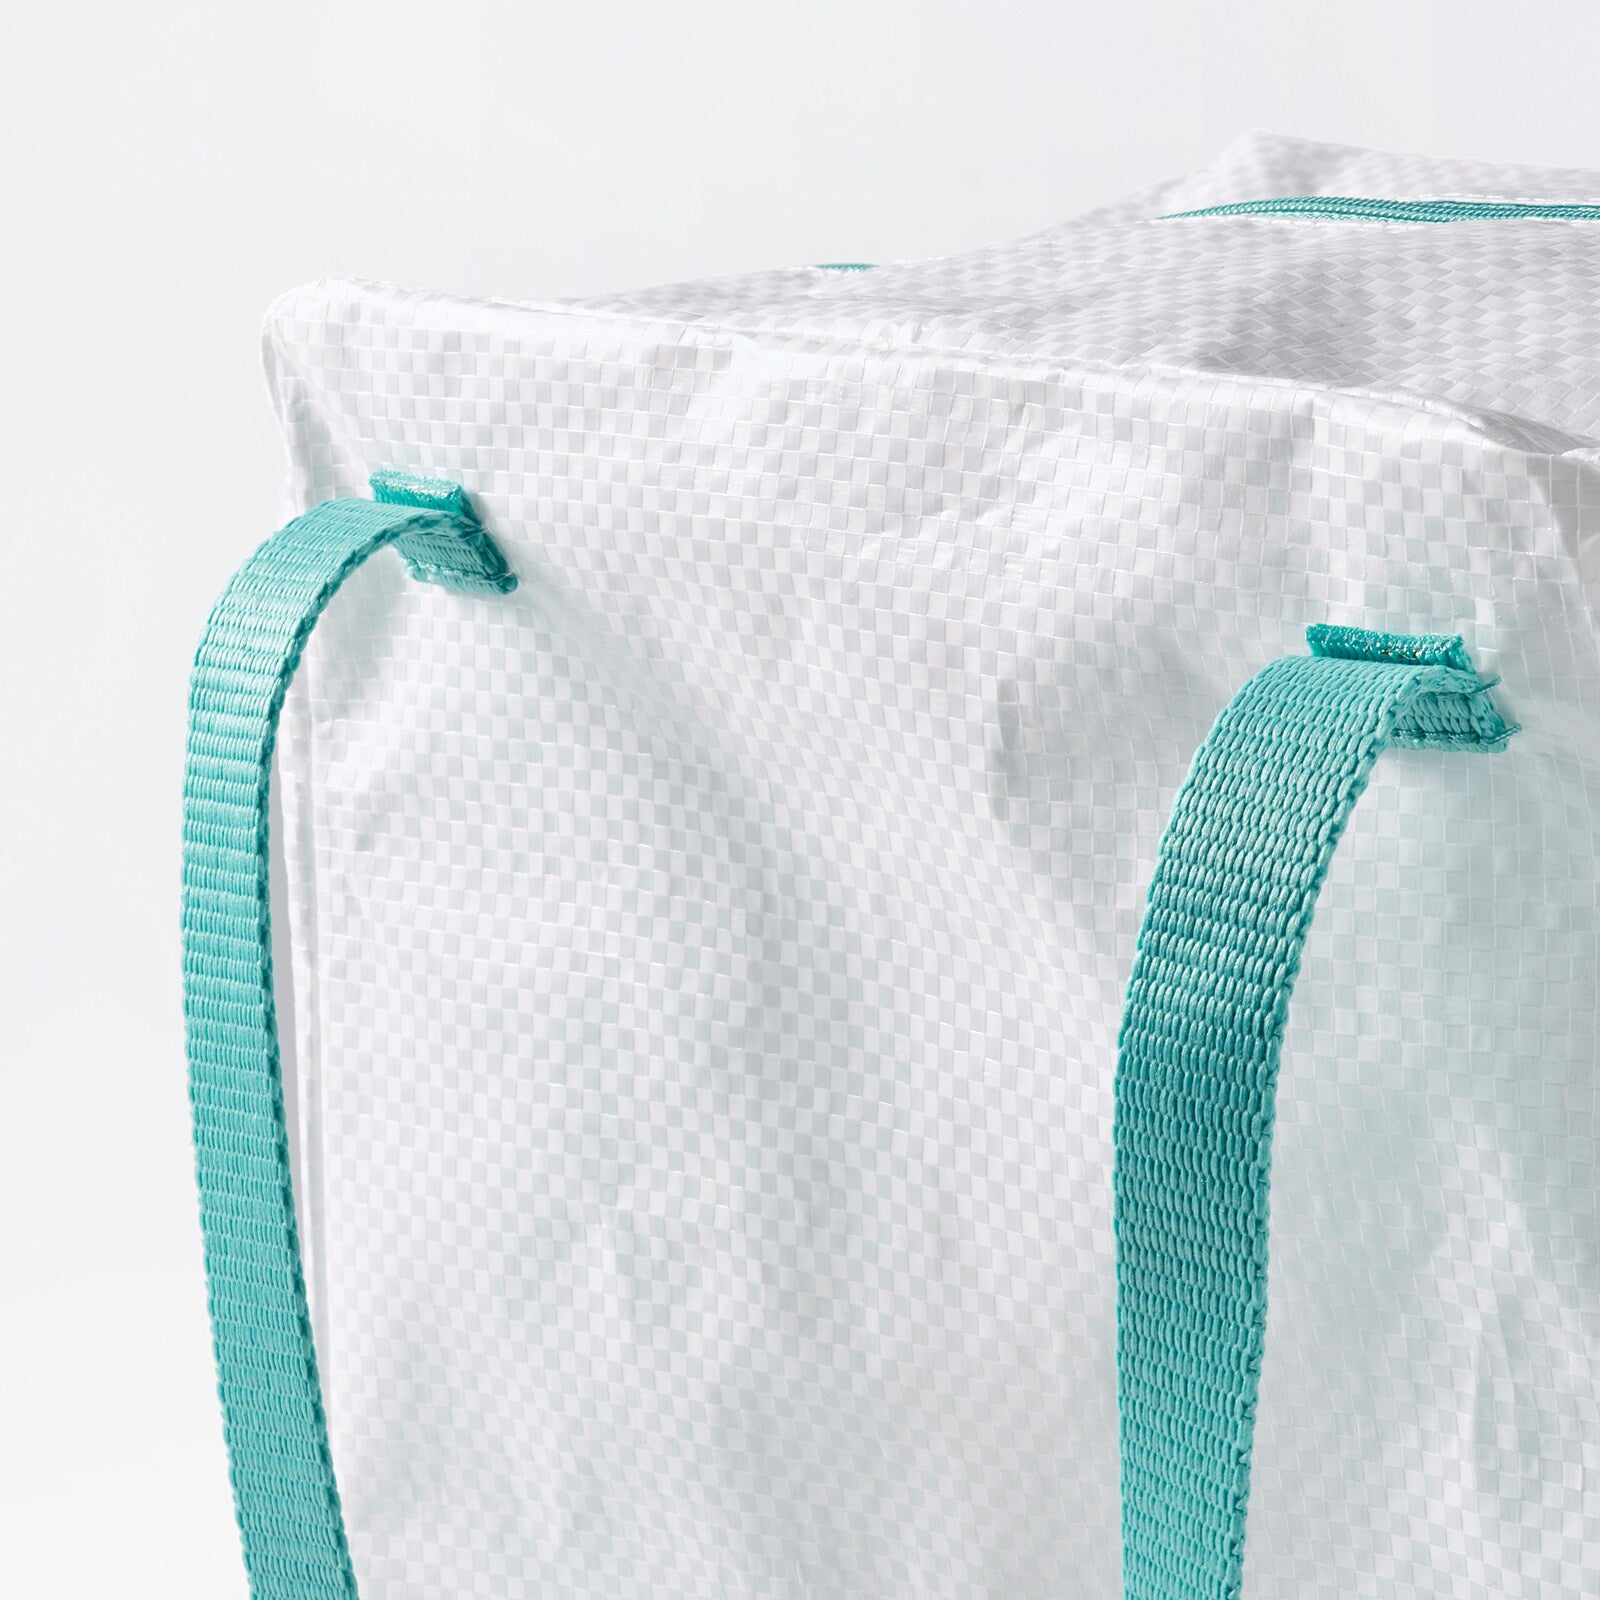 IKEA 365+ Lunch Bag, White/Turquoise 22x17x30 cm